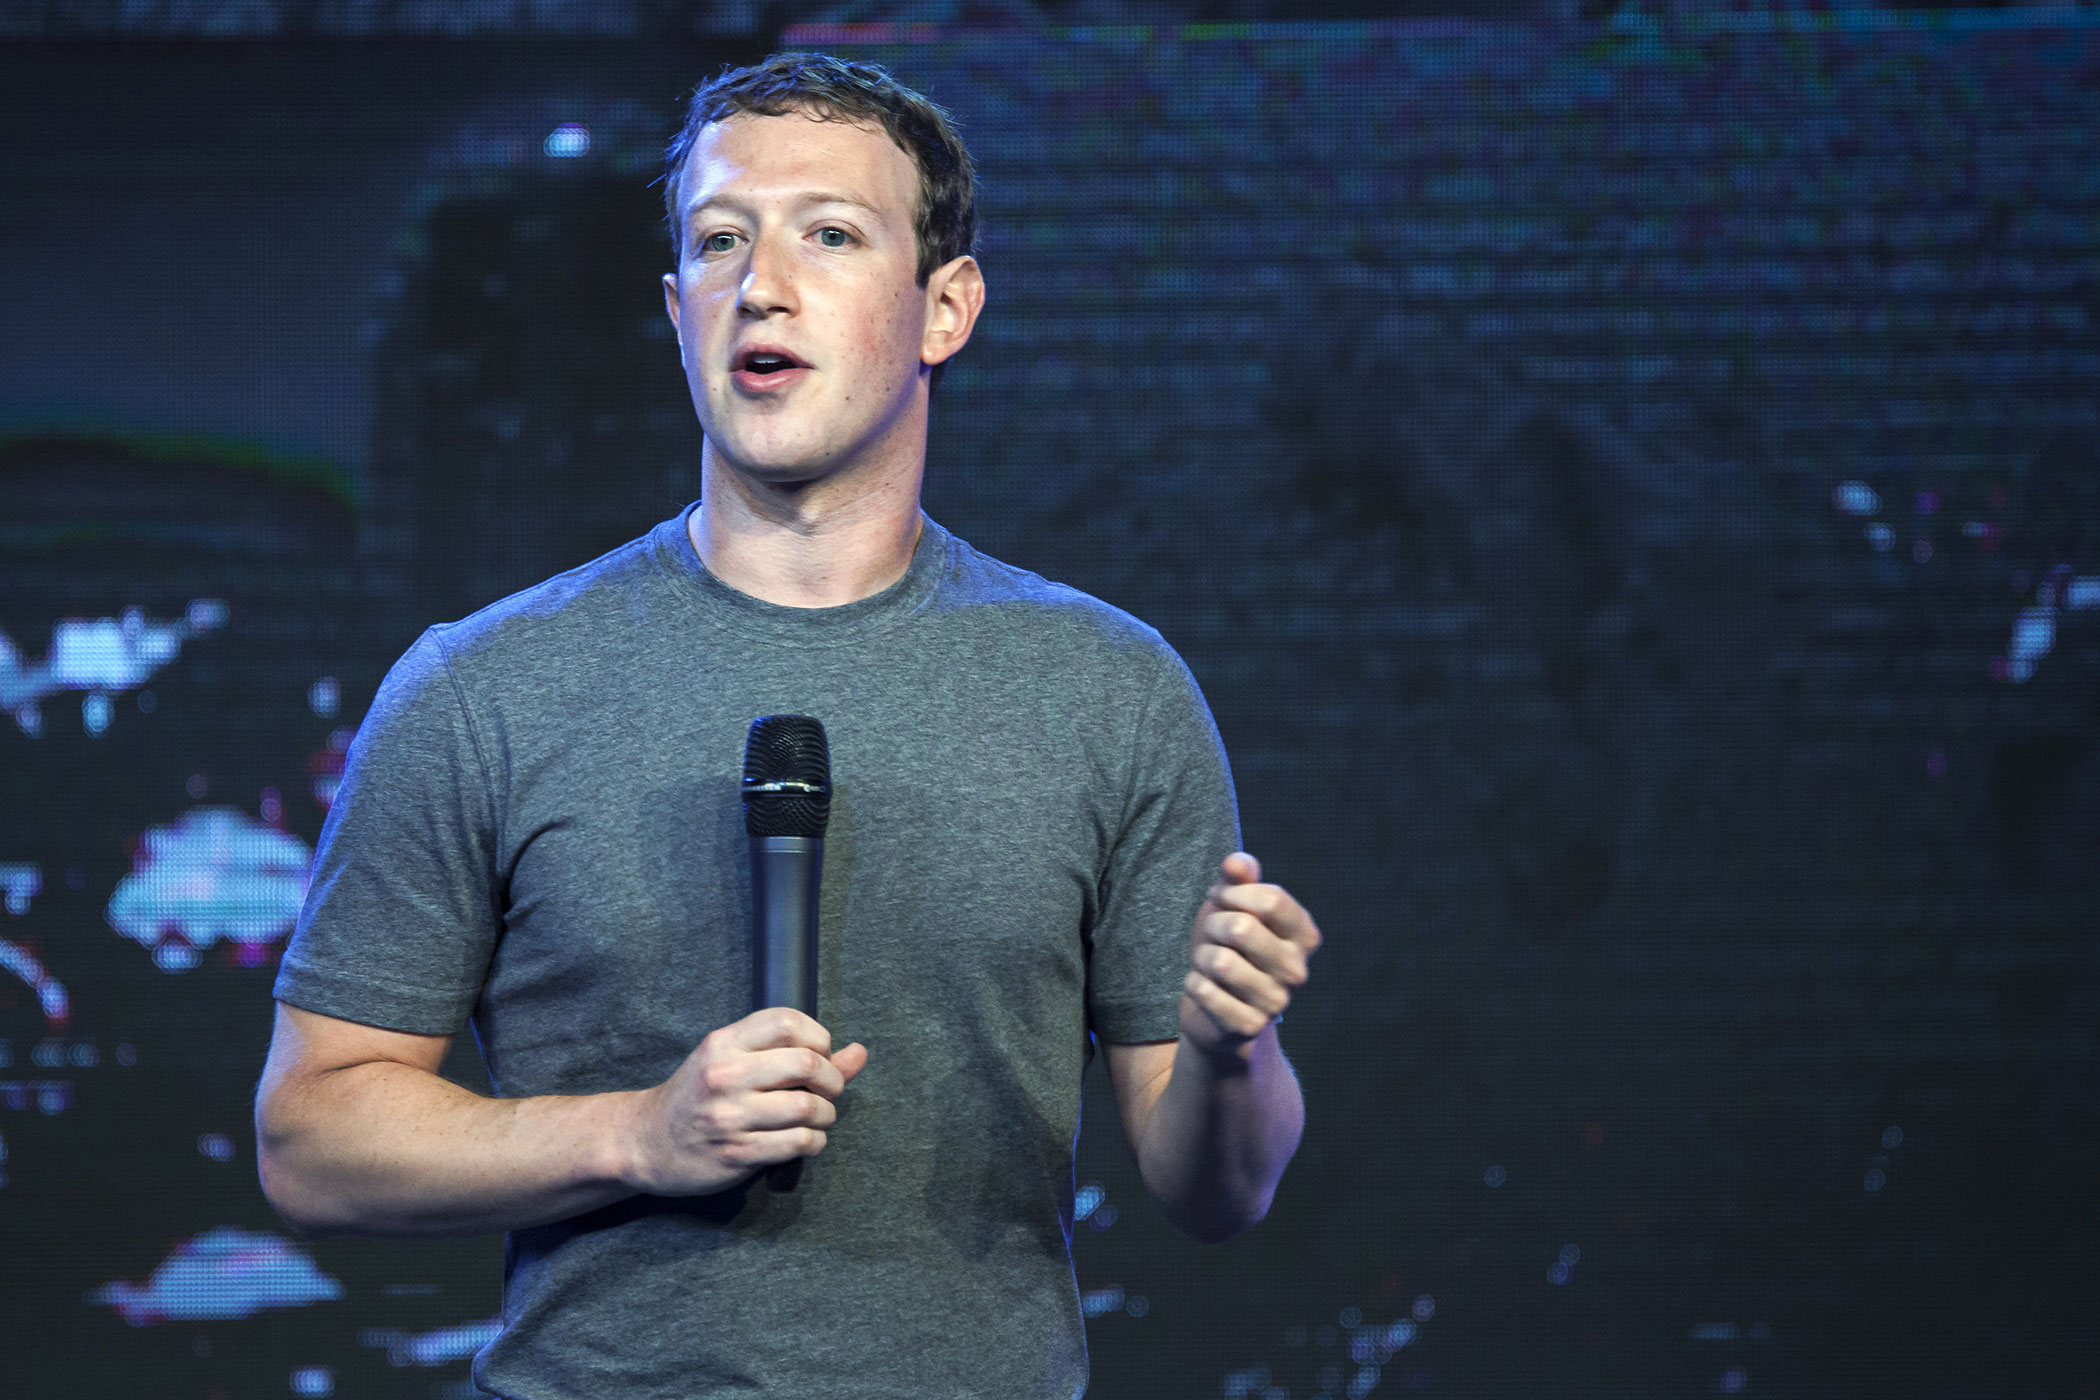 Mark Zuckerberg, chief executive officer of Facebook Inc., speaks during the Internet.org summit in New Delhi, India, on Thursday, Oct. 9, 2014. (Udit Kulshrestha—Bloomberg/Getty Images)